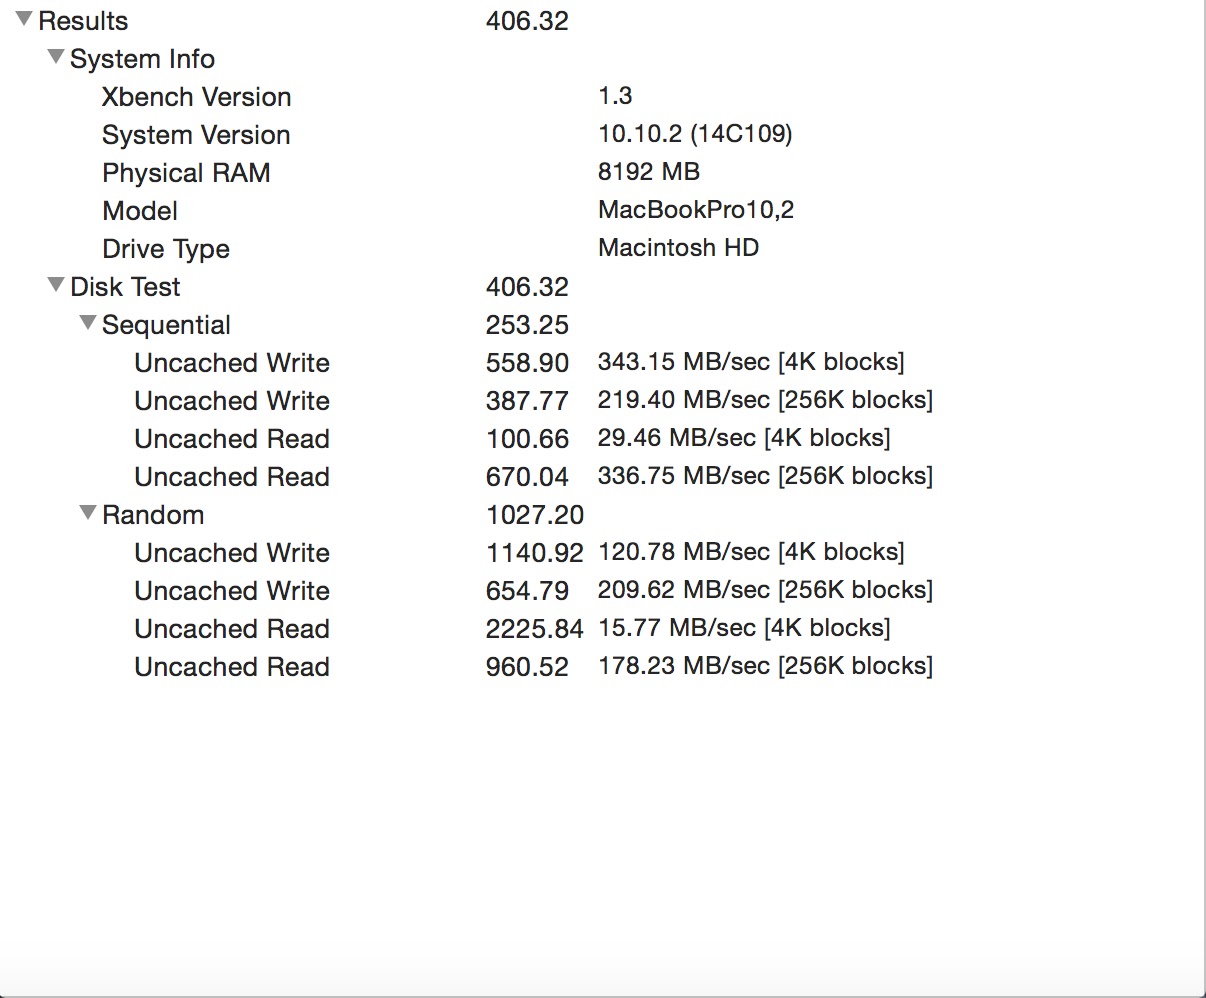 FileVault 2 Enabled Performance Numbers